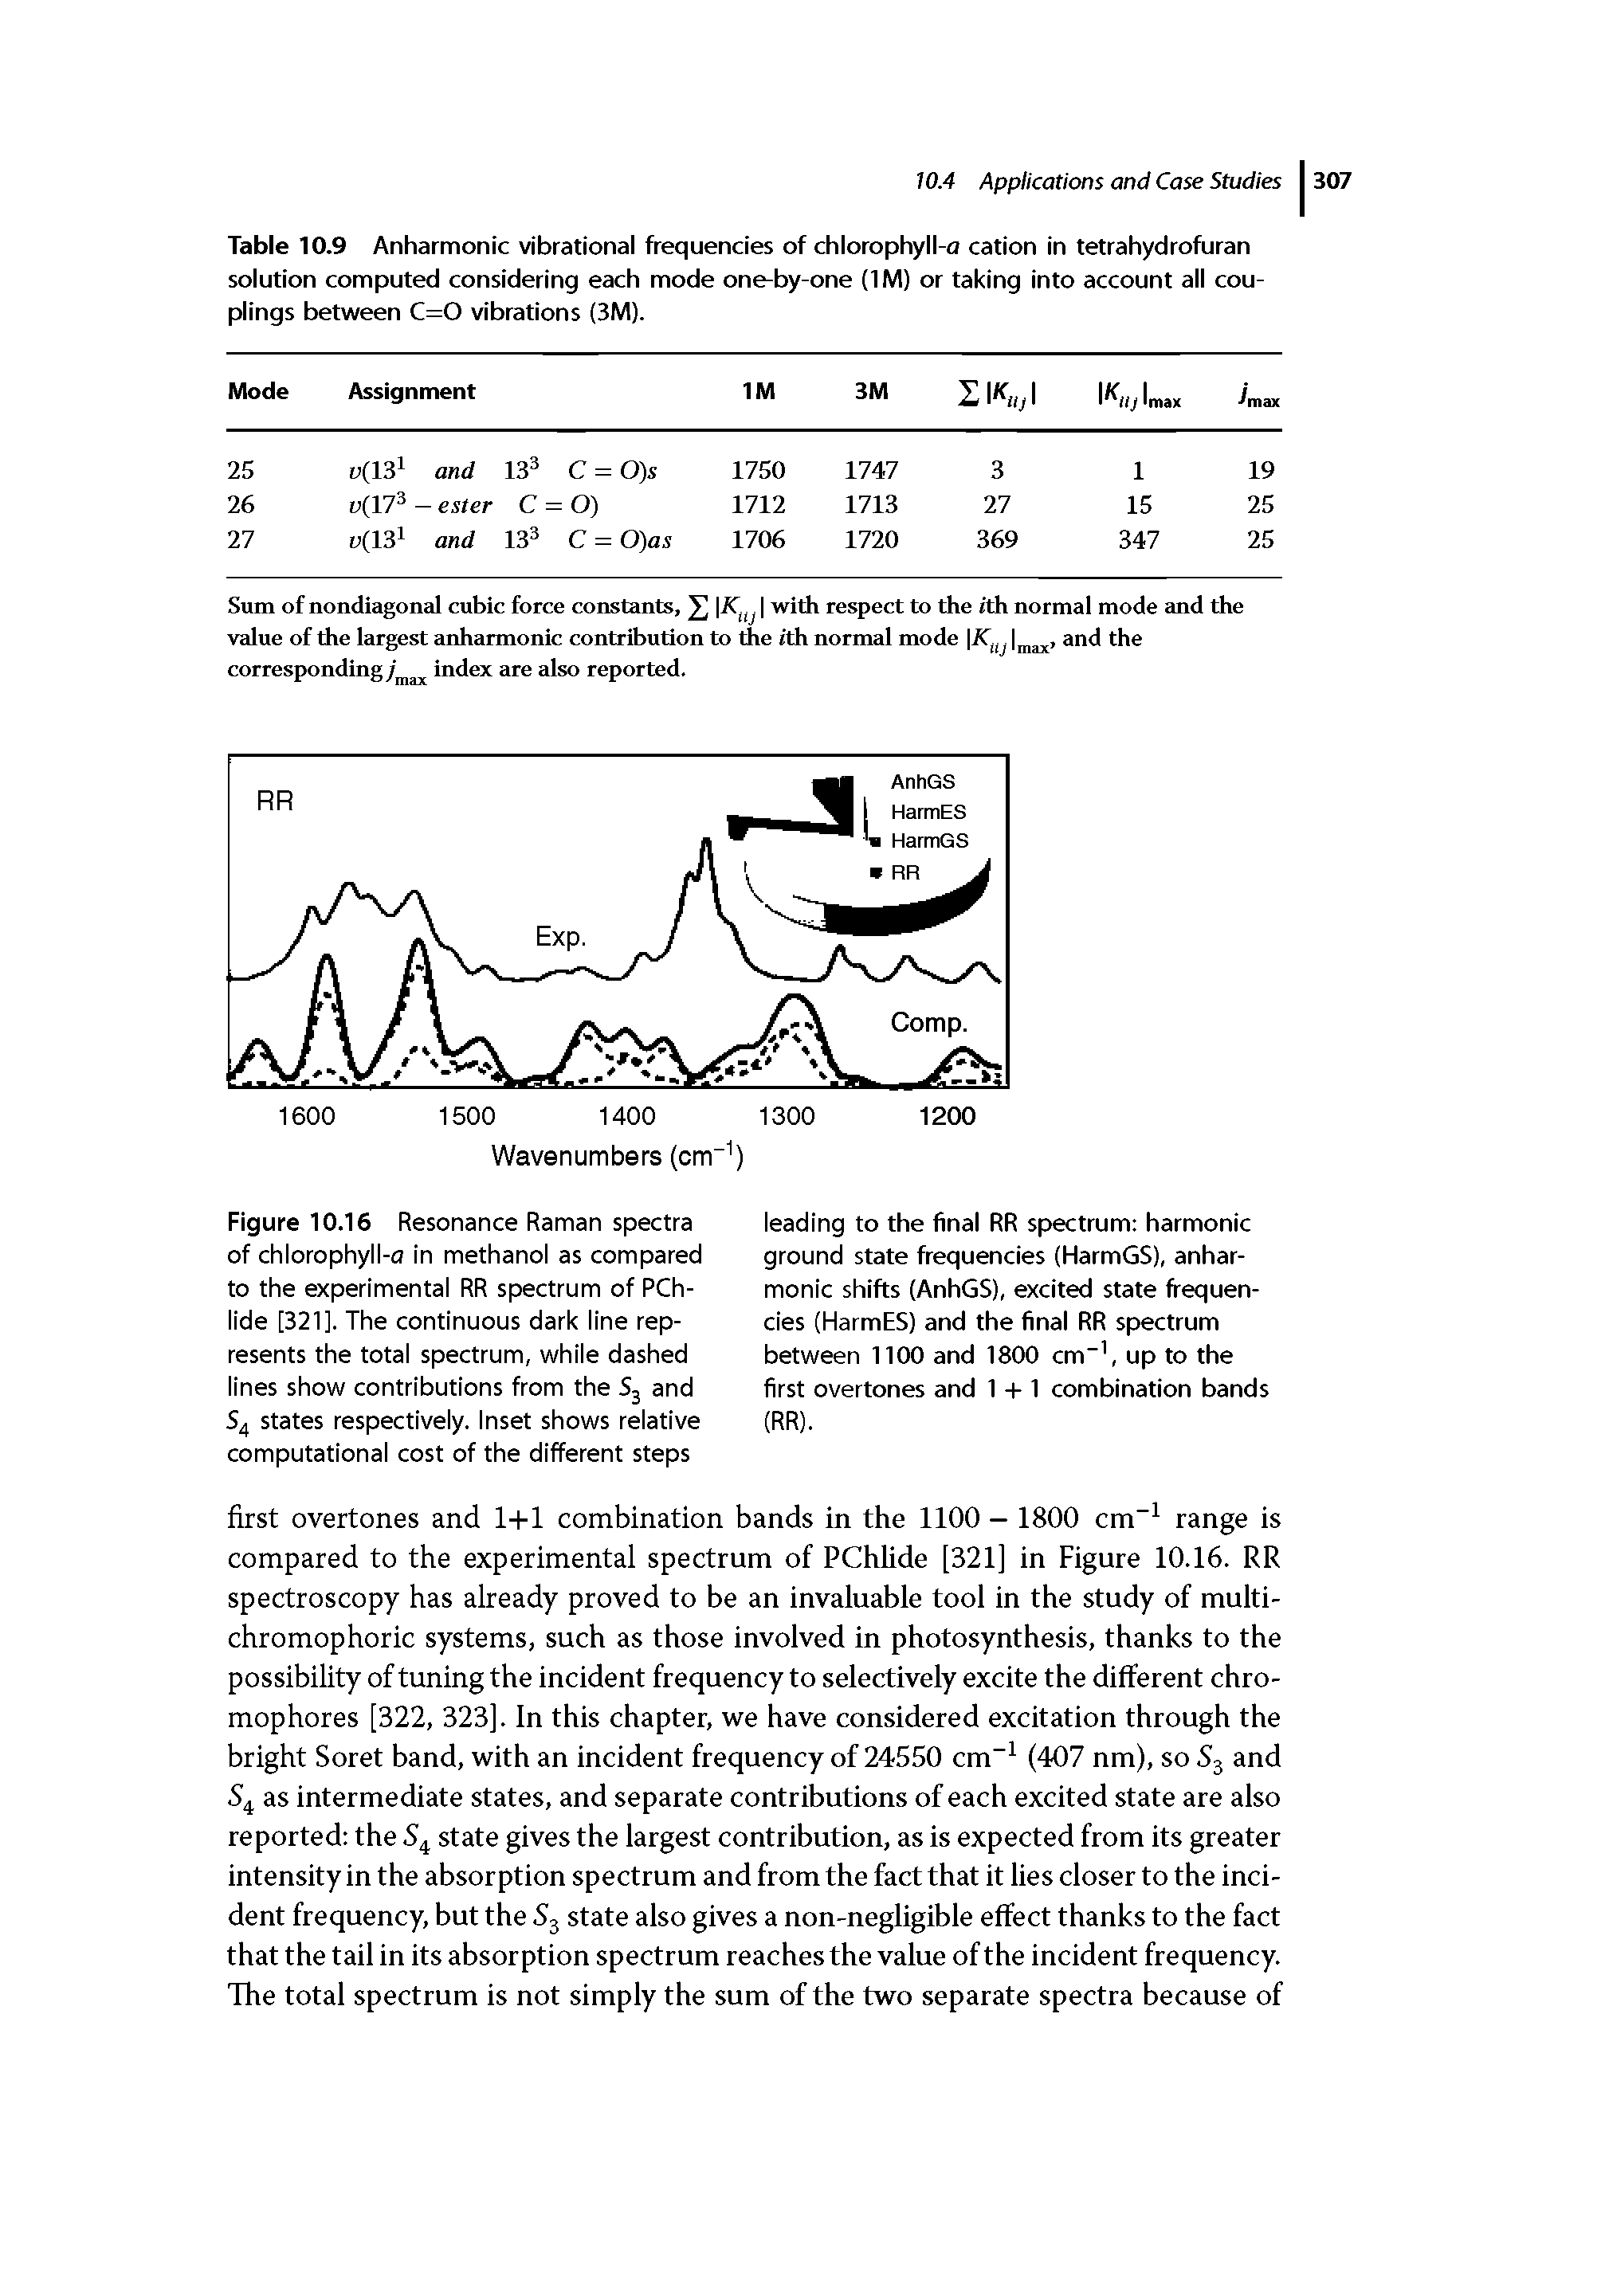 Table 10.9 Anharmonic vibrational frequencies of chlorophyll-a cation in tetrahydrofuran solution computed considering each mode one-by-one (1M) or taking into account all couplings between C=0 vibrations (3M).